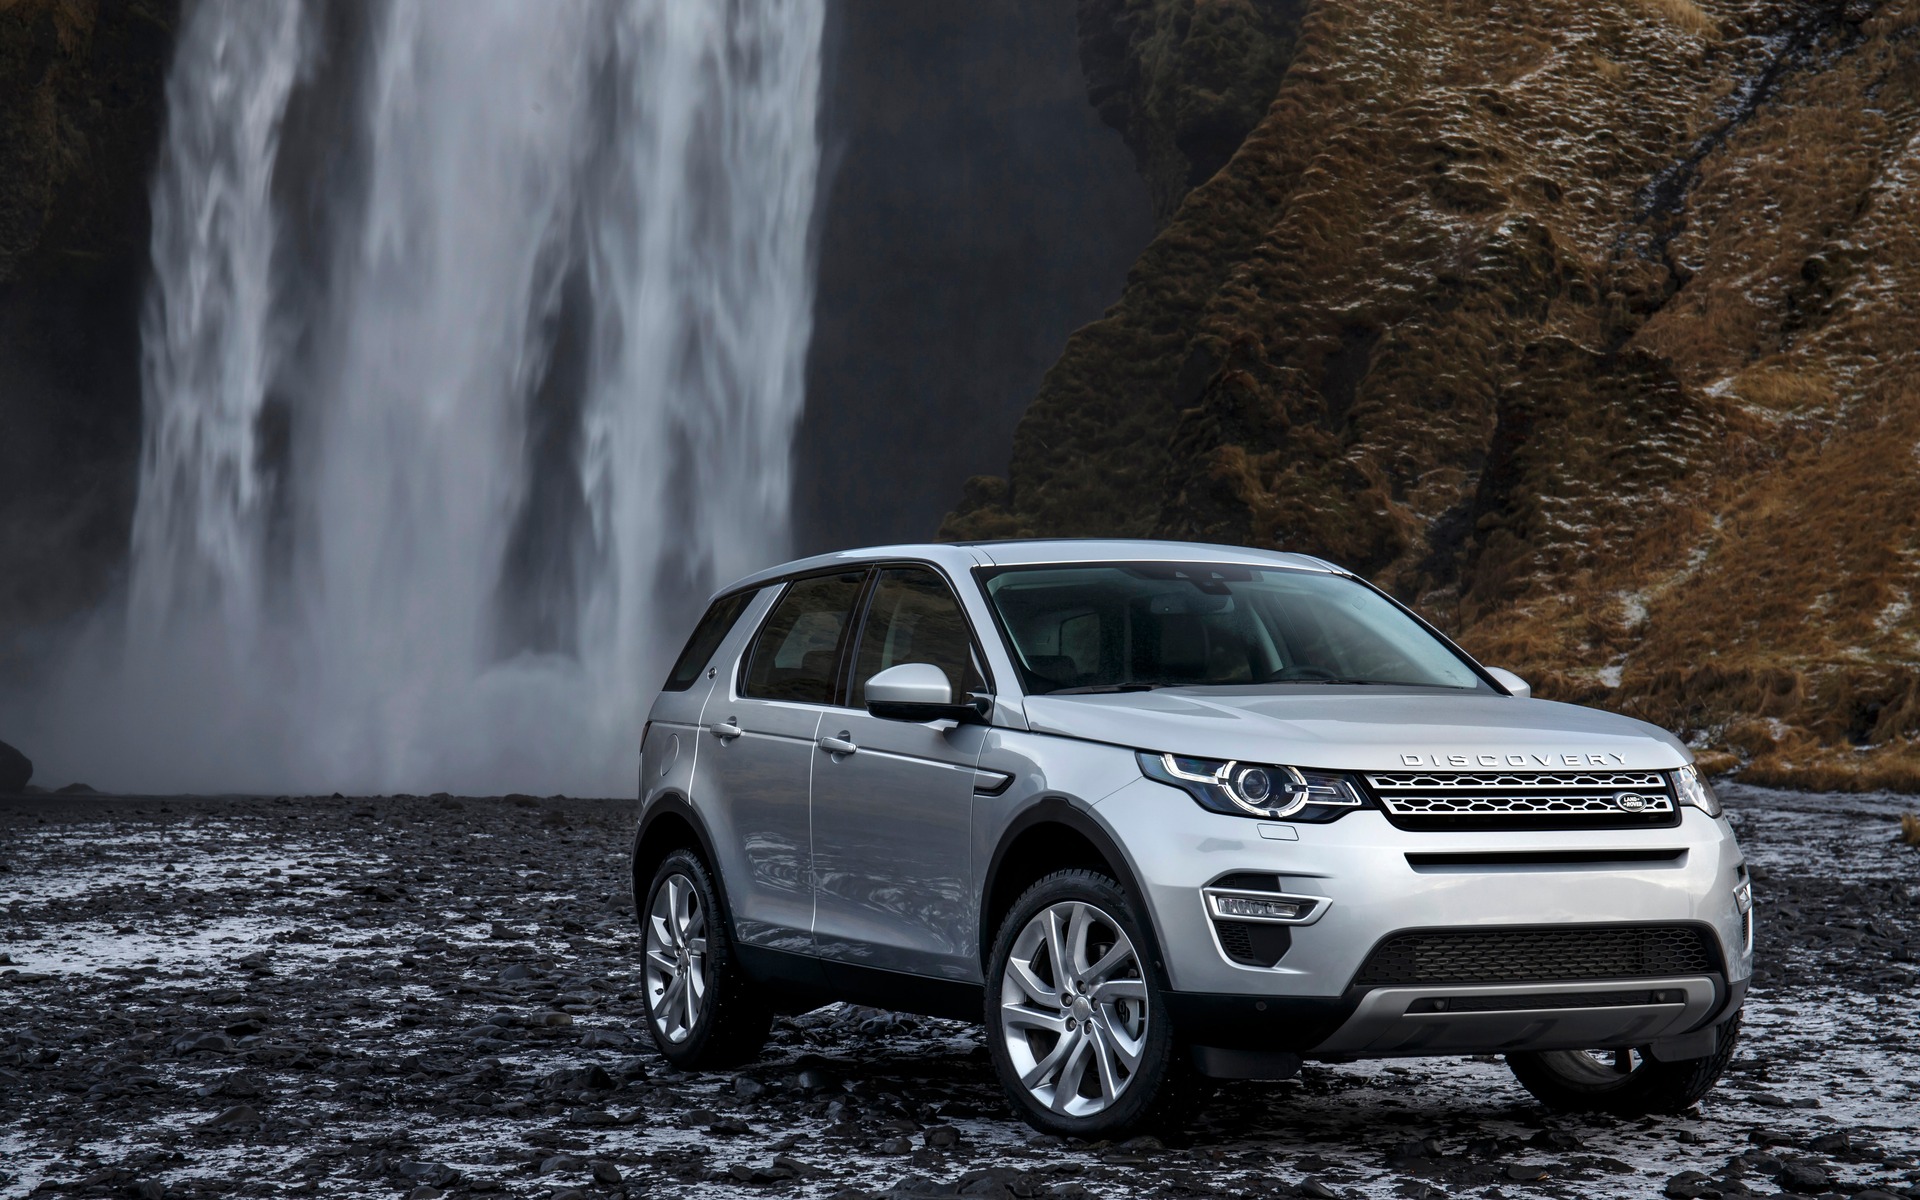 Land rover sport 2015. Land Rover Discovery Sport 2015. Ленд Ровер Дискавери 2015. Новый ленд Ровер Дискавери спорт.